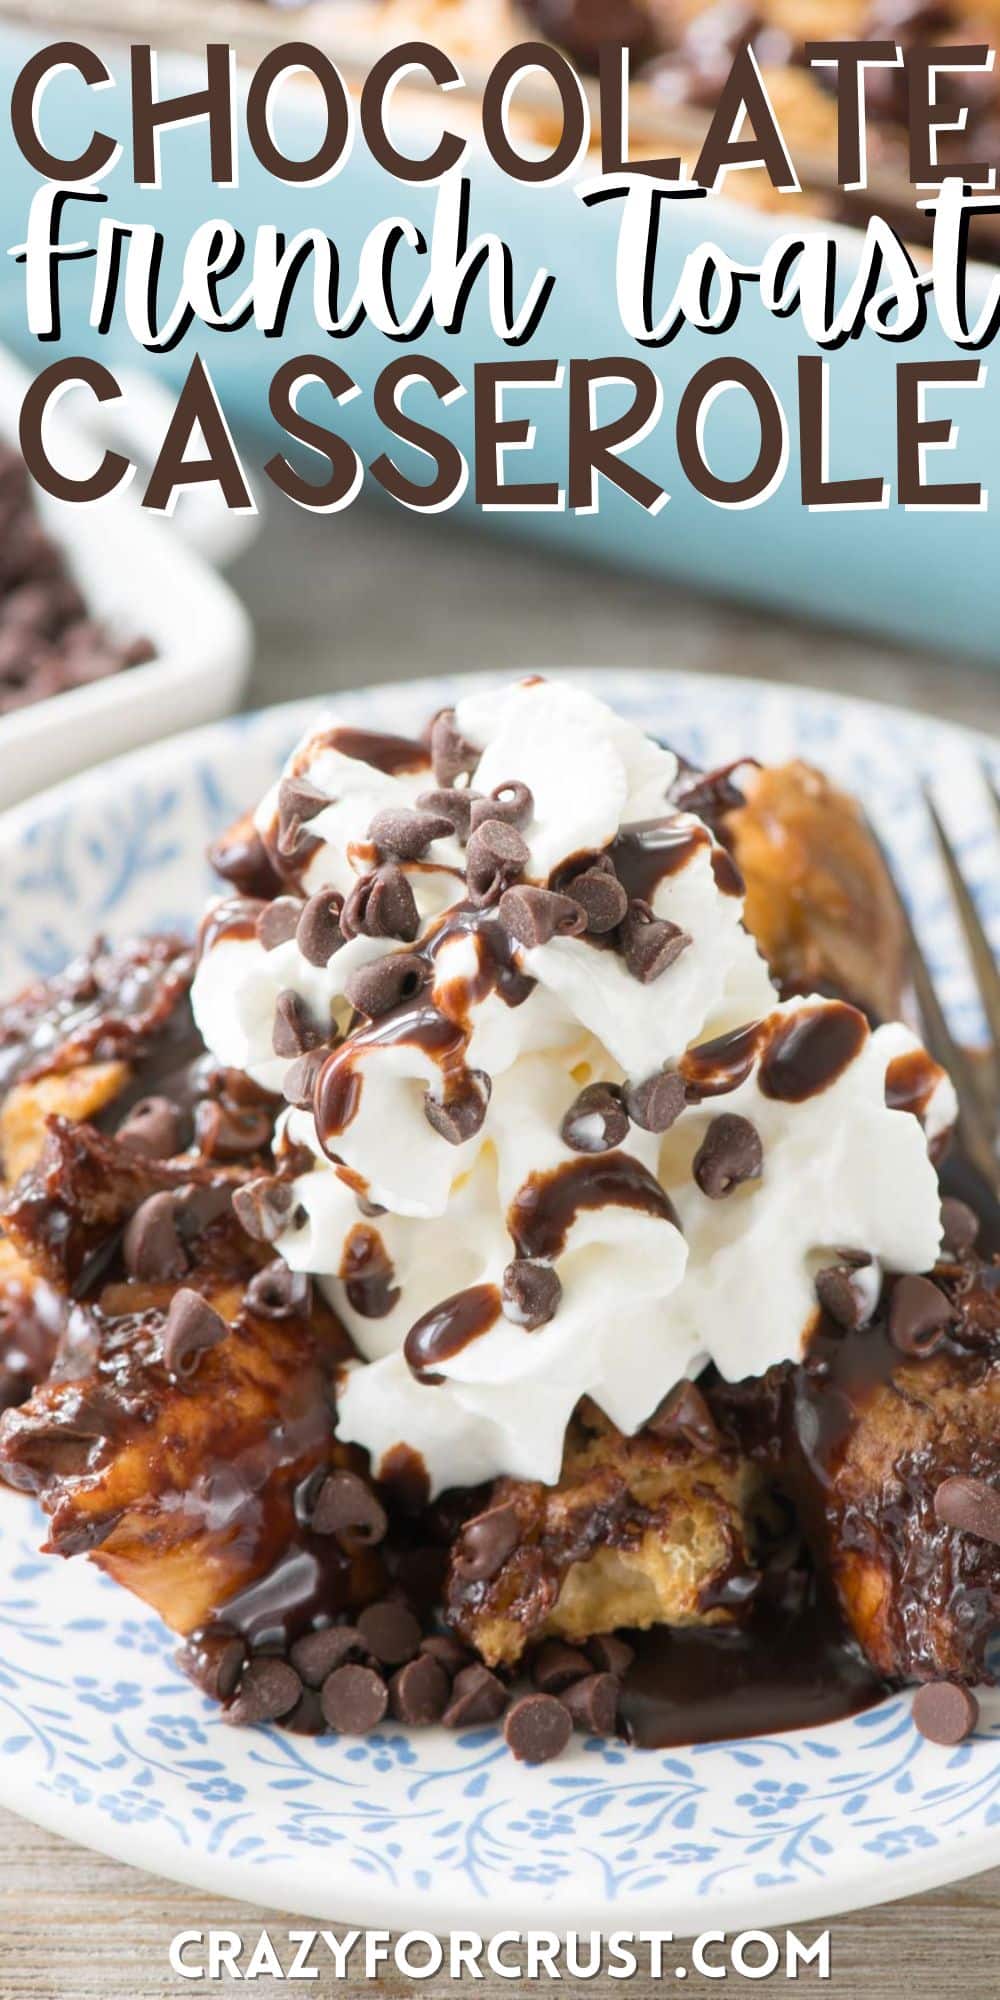 French toast mixed with many chocolate chips in a white dish with whipped cream on top with words on the image.